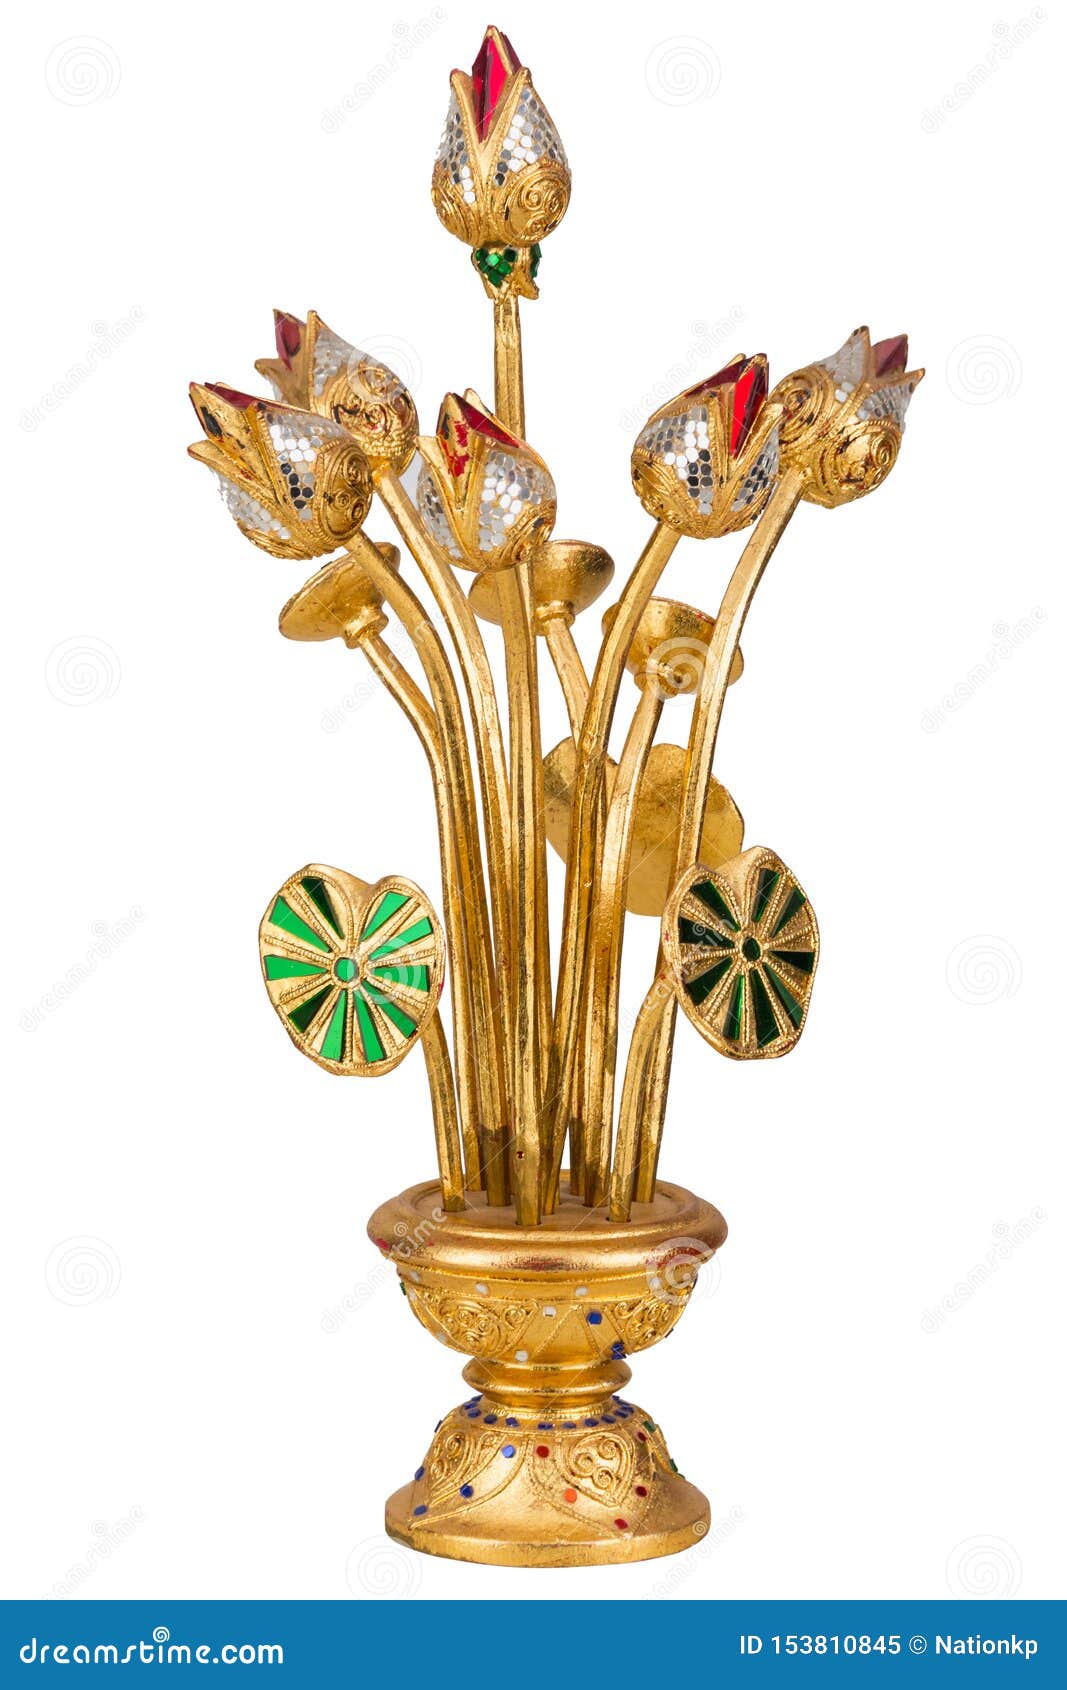 Gold Lotus Flower Statue Isolated Stock Image - Image of golden